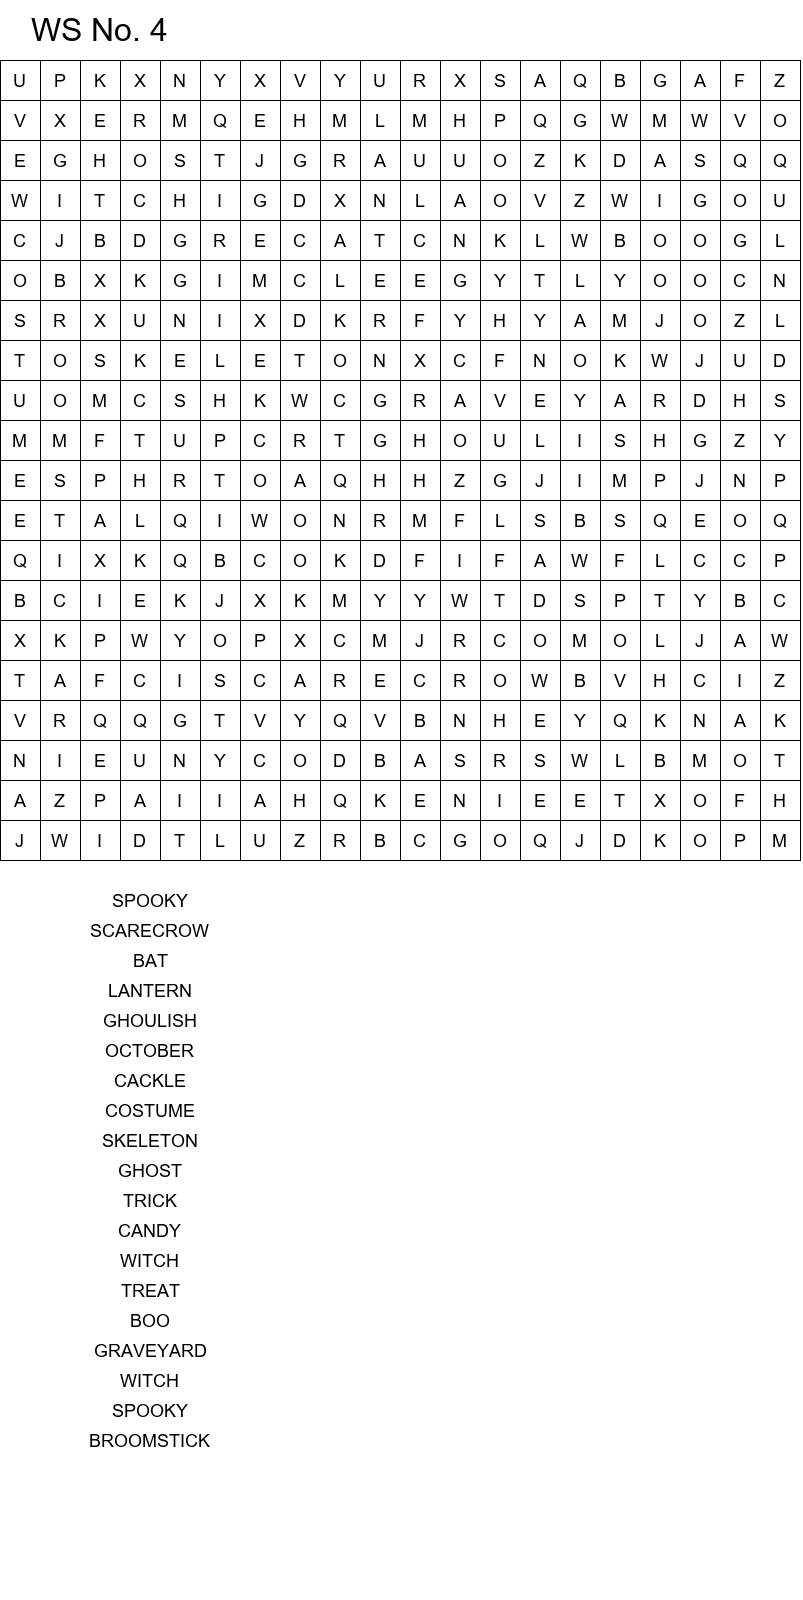 Spooky Halloween word search with solutions size 20x20 No 4